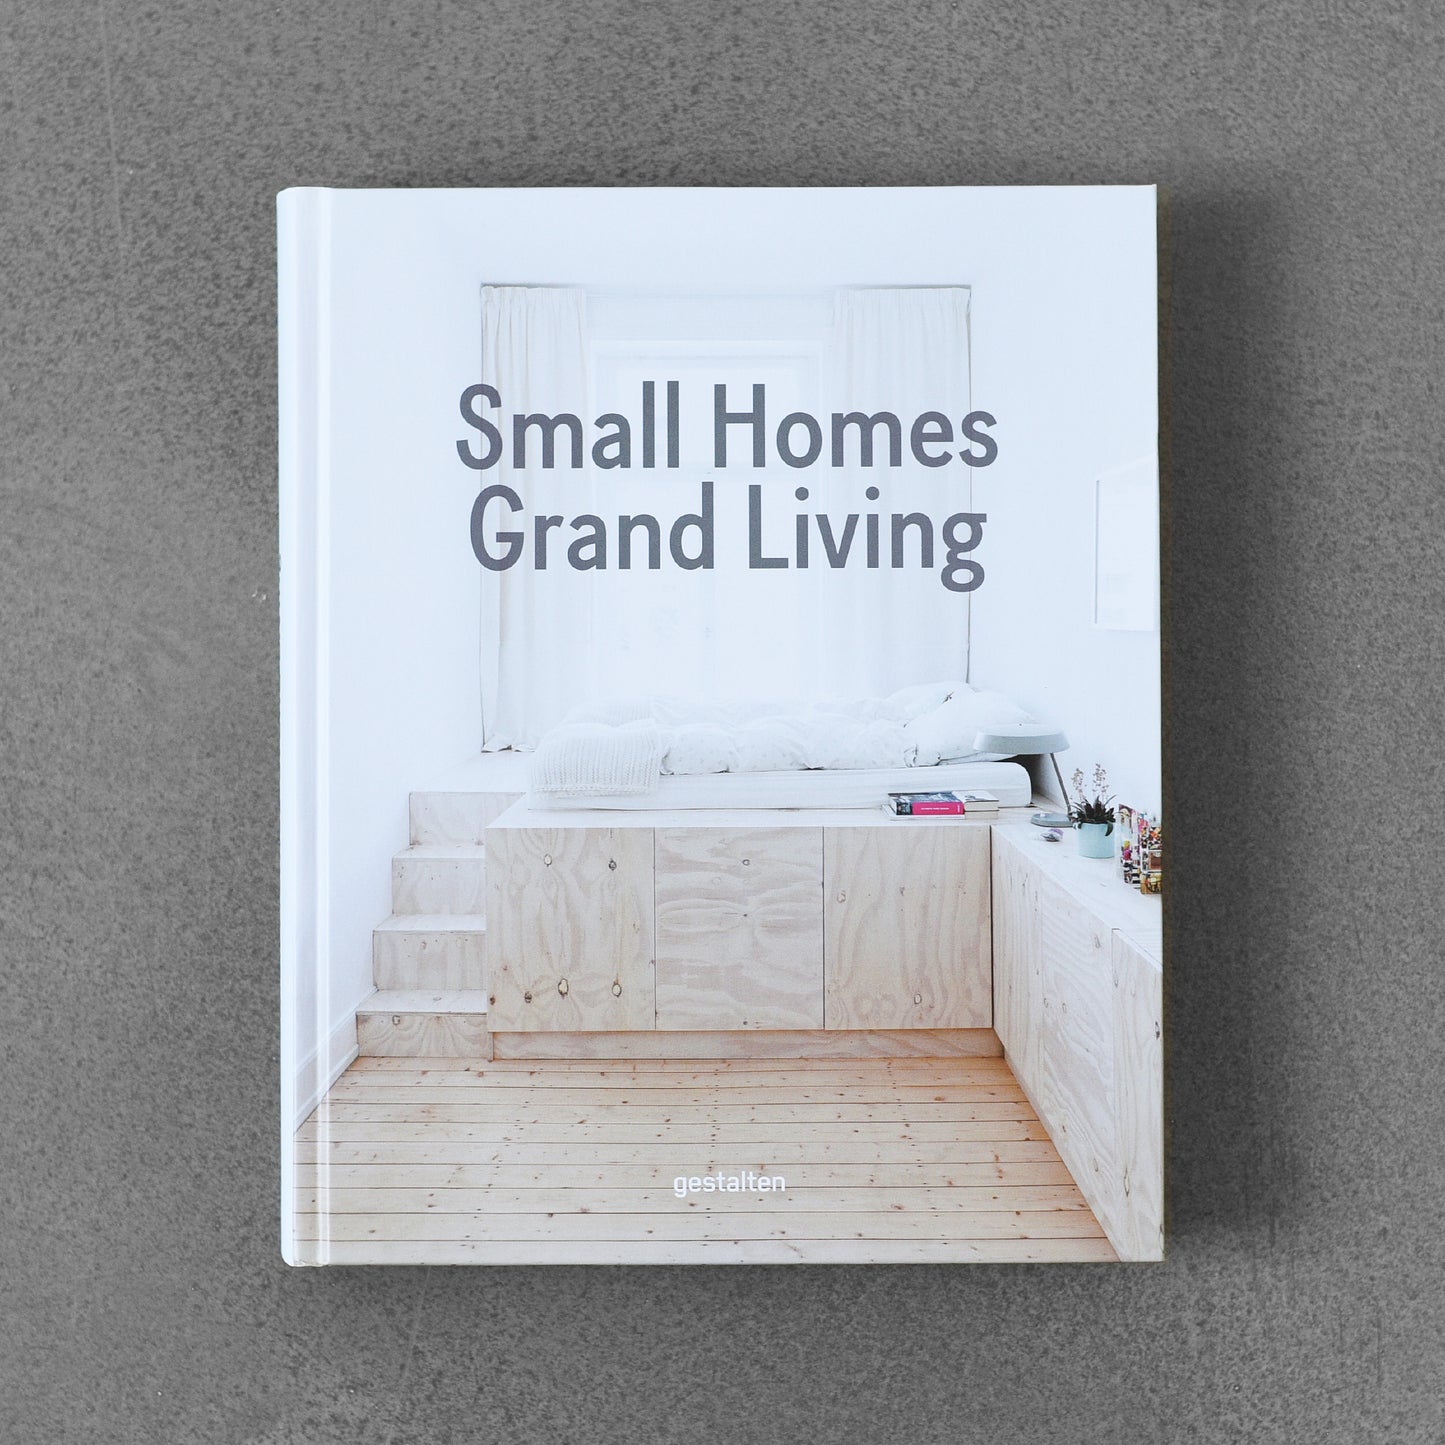 Small Homes Grand Living